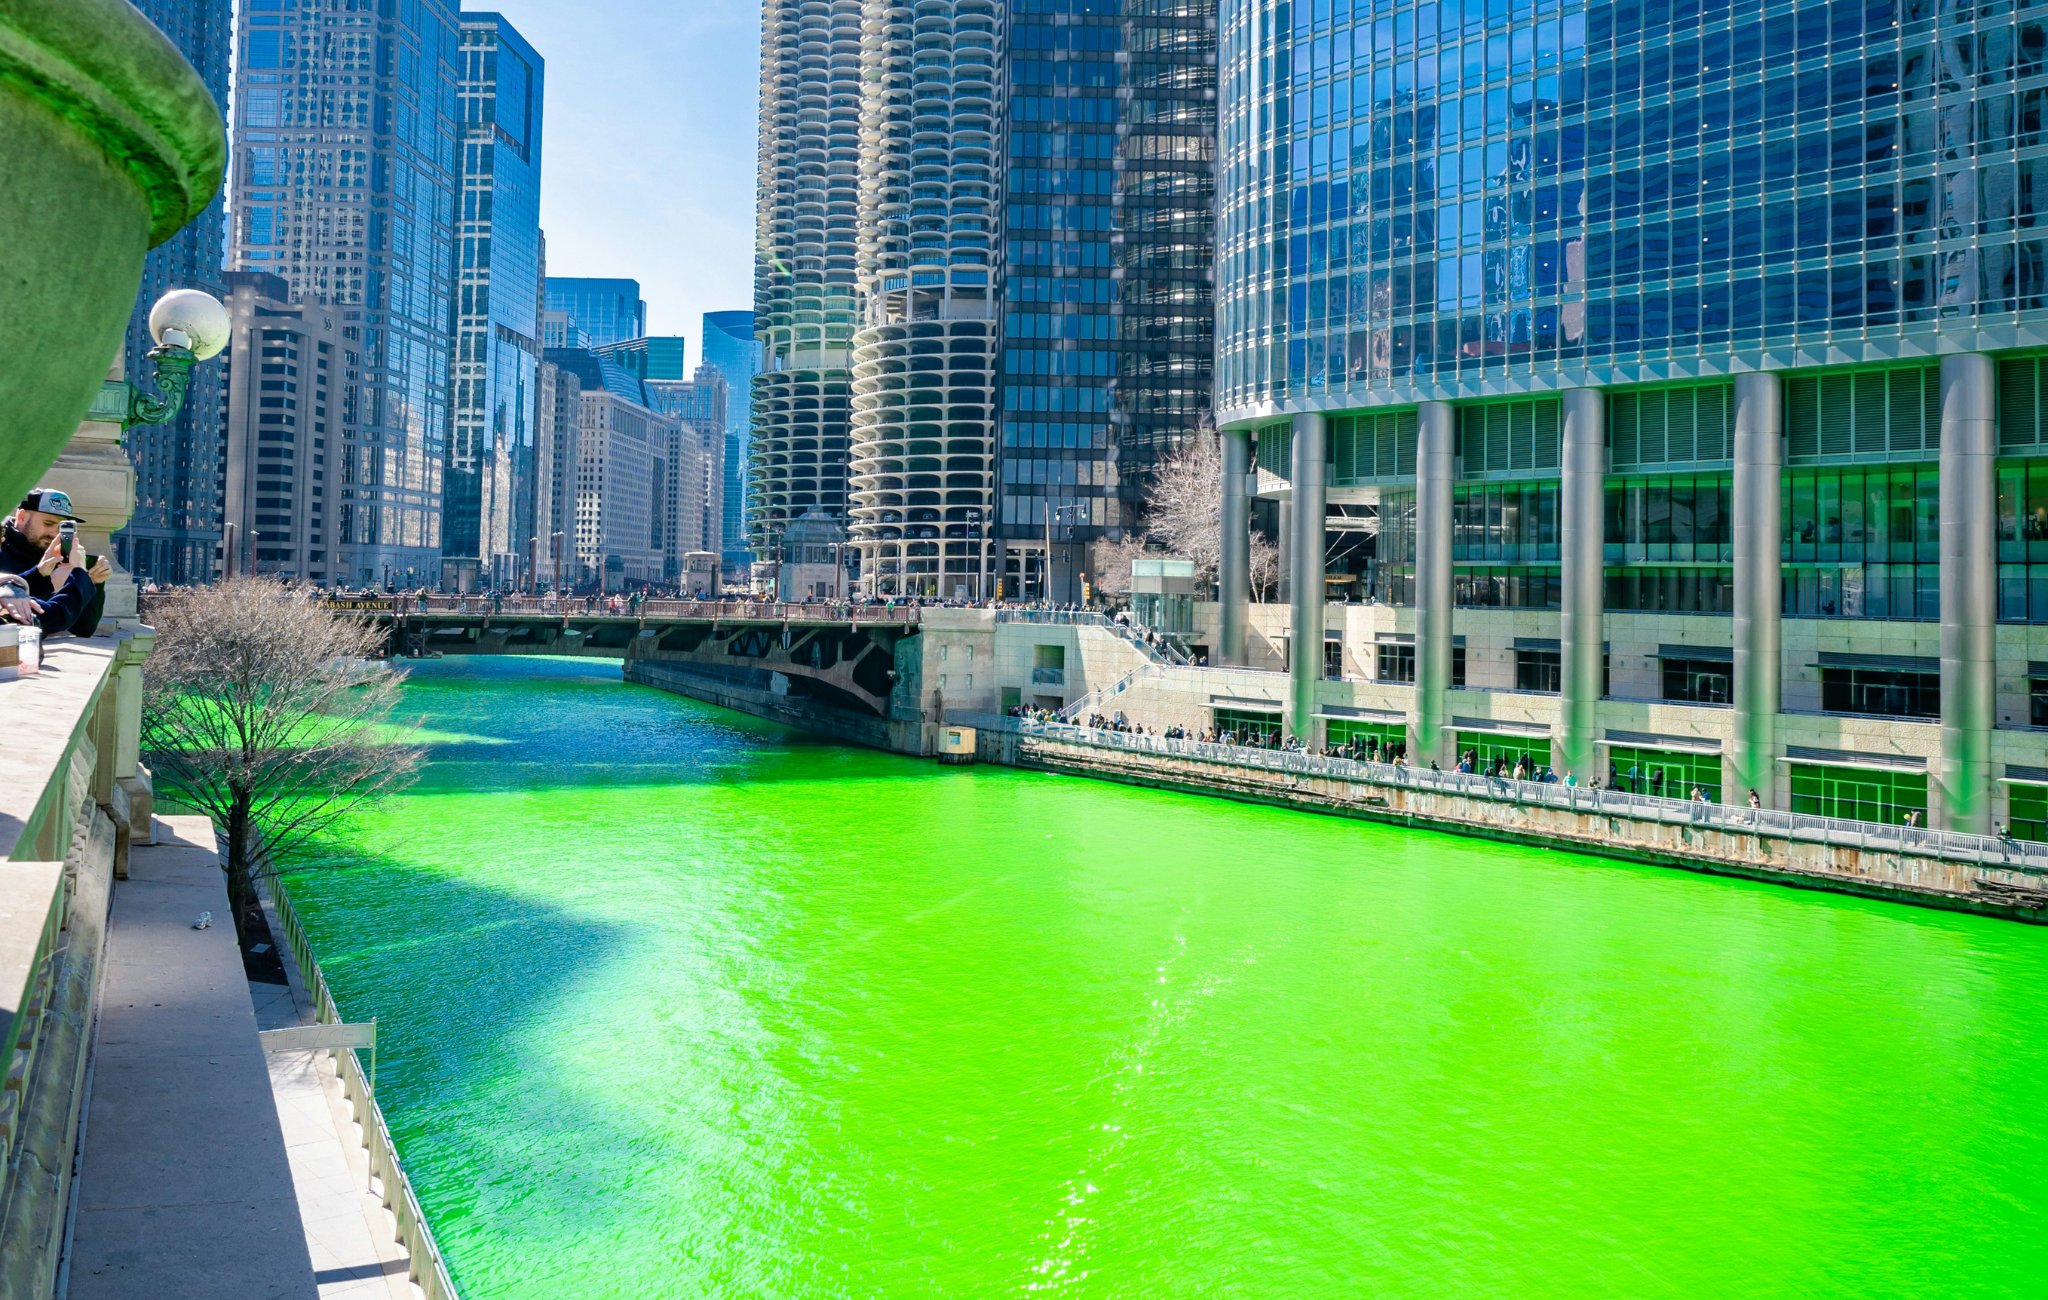 10-best-st-patricks-day-parades-across-the-us